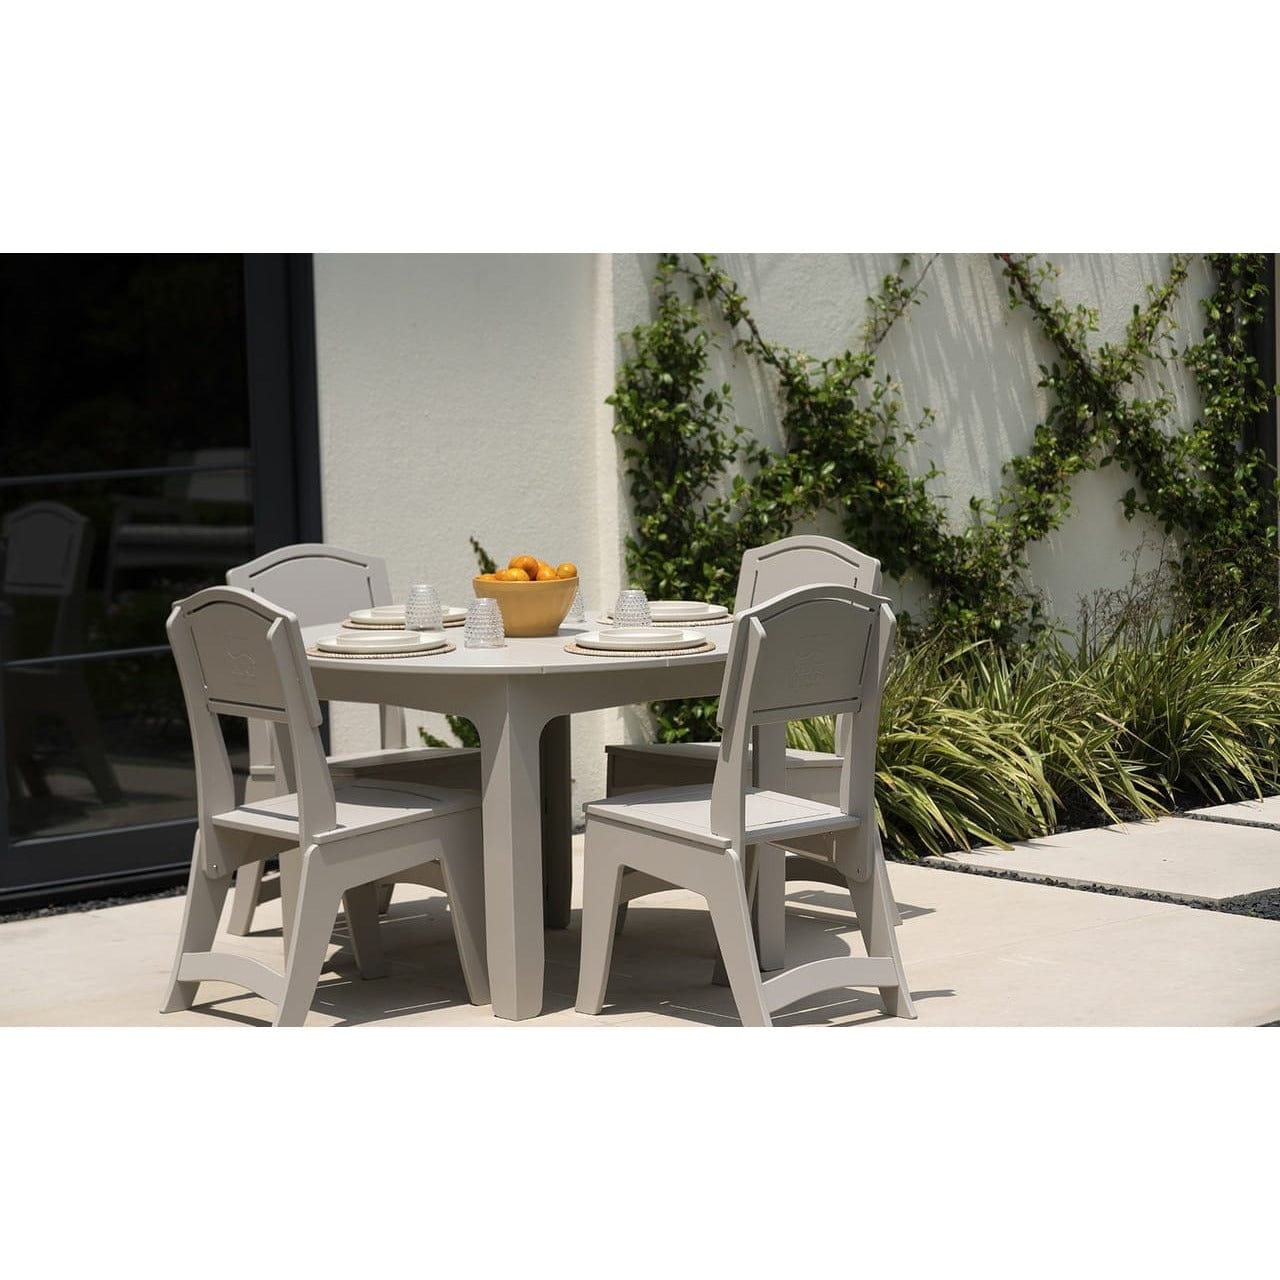 Ledge Lounger Mainstay Round Dining Table